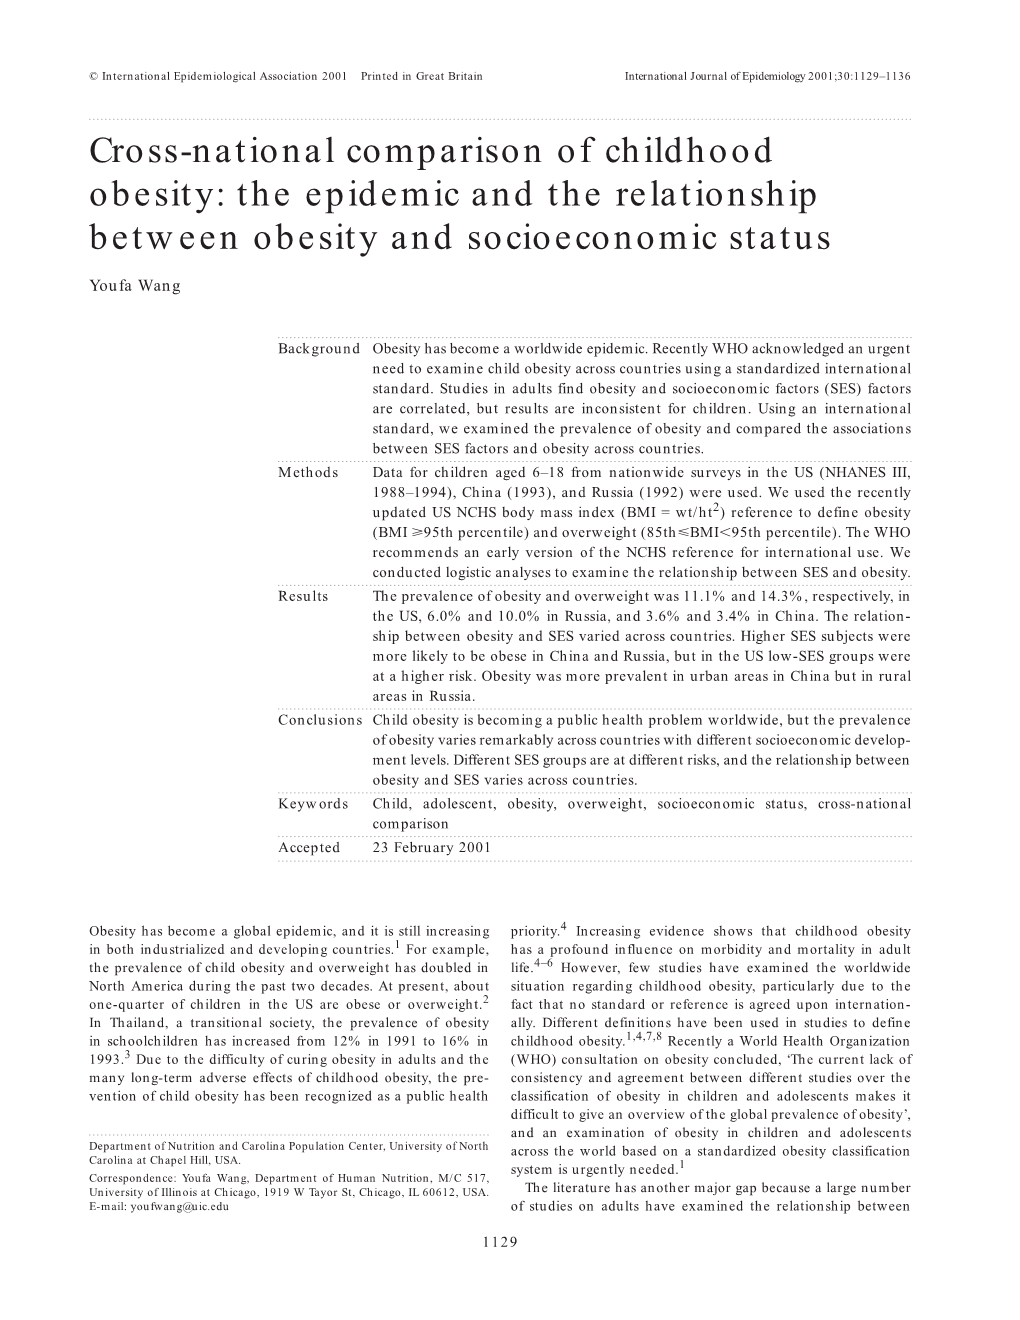 Cross-National Comparison of Childhood Obesity: the Epidemic and the Relationship Between Obesity and Socioeconomic Status